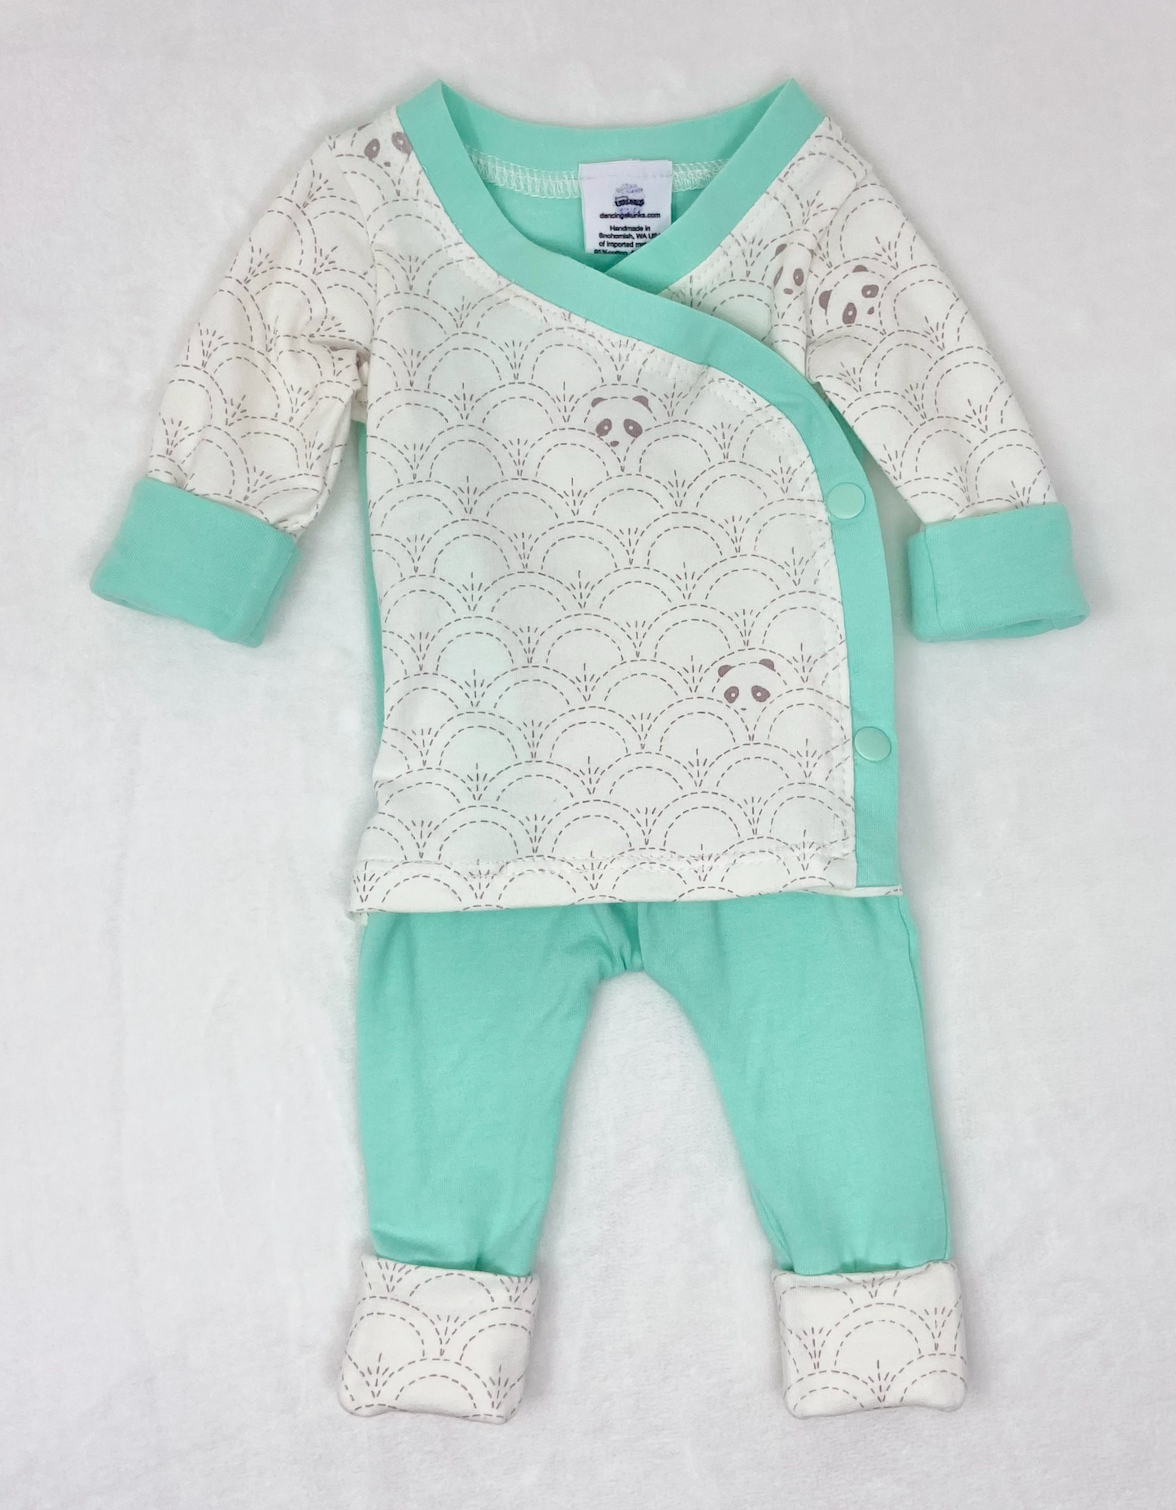 Newborn clothes, Newborn romper, baby clothes, baby panda outfit, gender neutral baby outfit, going home outfit, NICU clothes, NICU outfit, skin to skin with baby, grow with me outfit for baby, baby girl clothes, preemie clothes, preemie outfit, Kangaroo care outfit